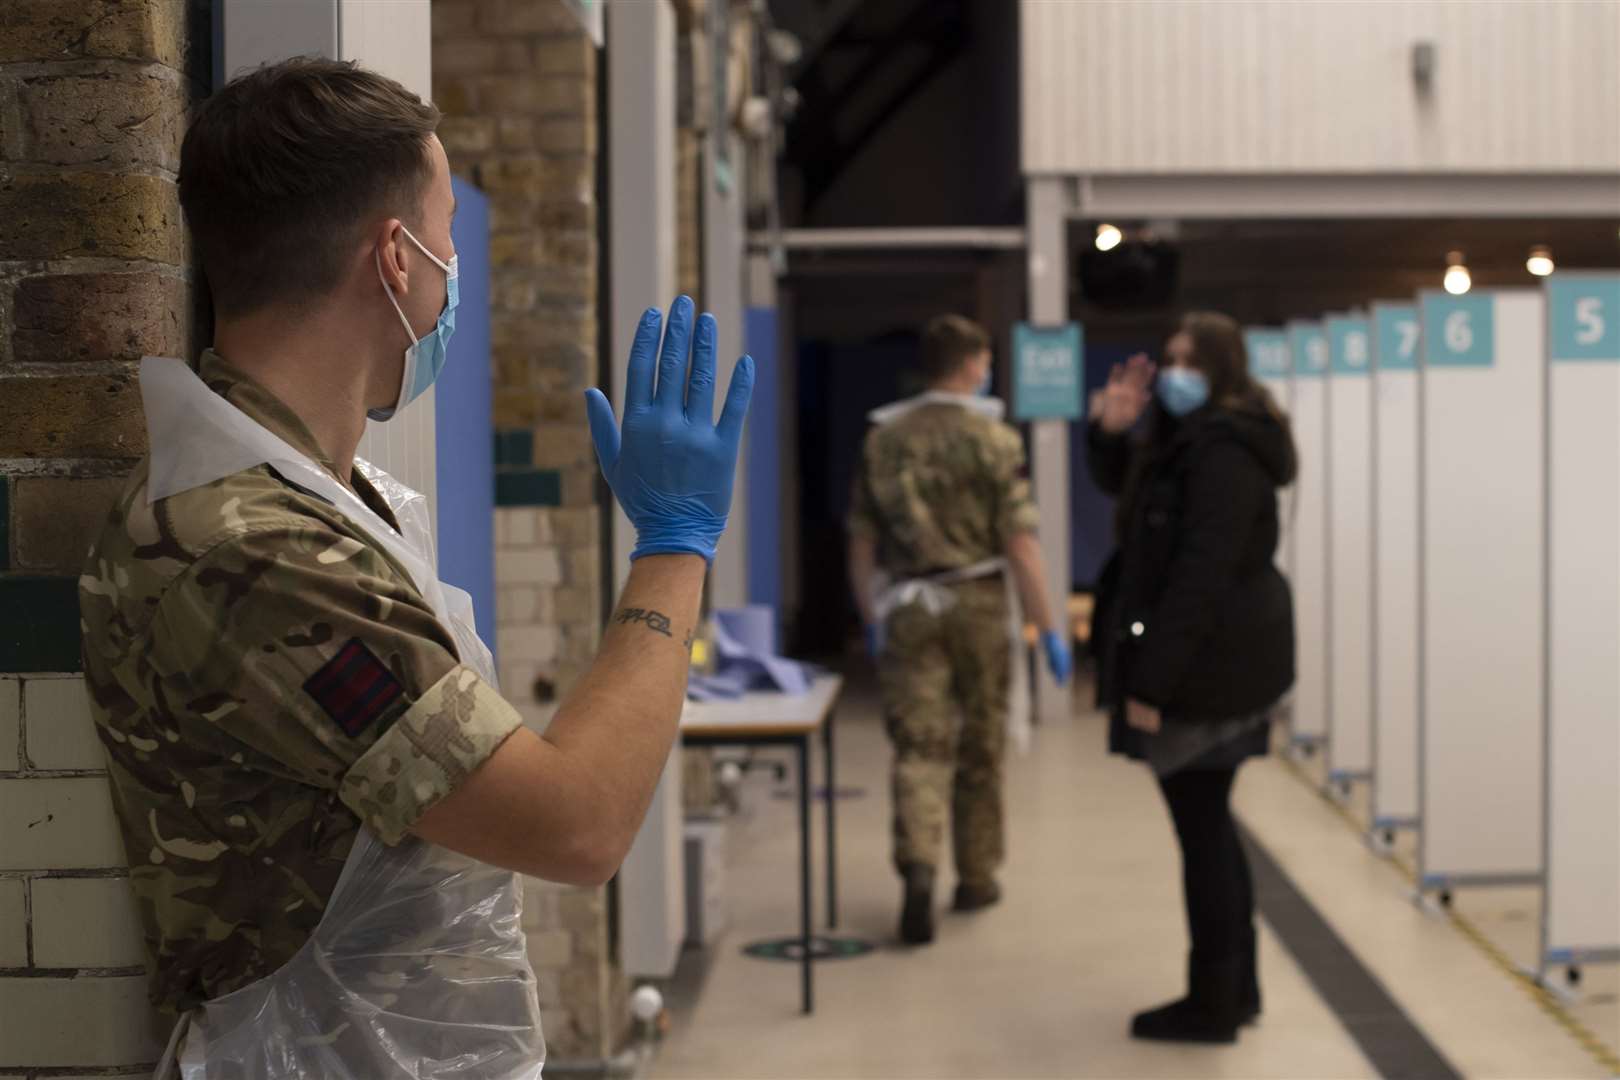 Lance Corporal Jack Lewis of 35 Engineer Regiment at an asymptomatic test centre. Picture: Ministry of Defence